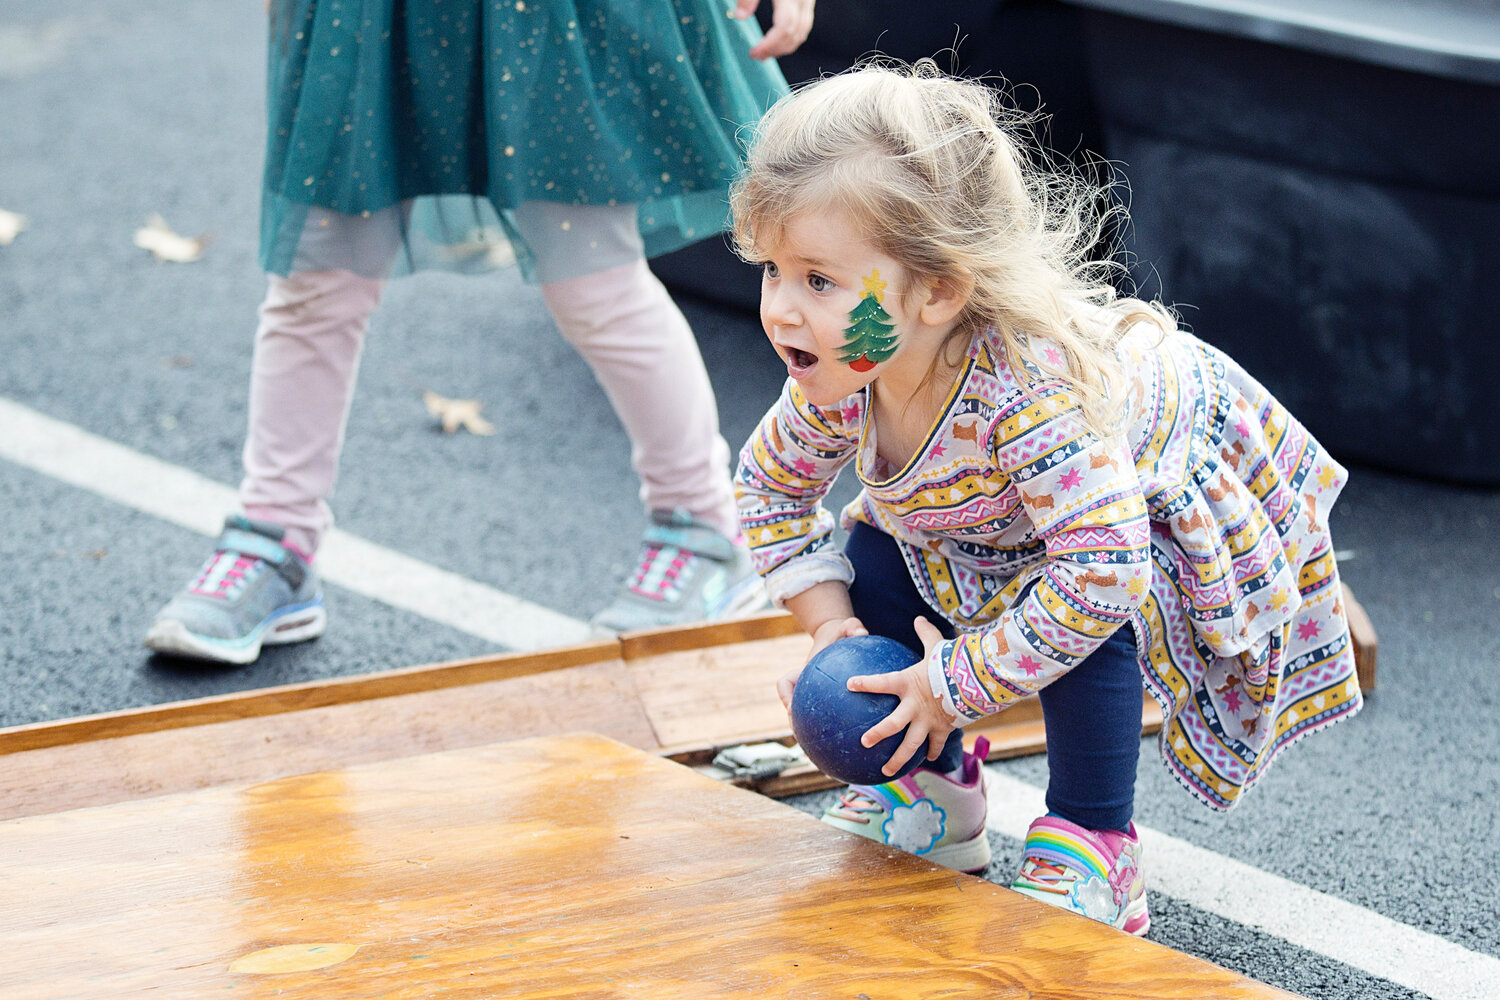 Lyla Boylan takes aim while playing a game of snowman bowling at the tree-lighting event on Saturday, Dec. 2.